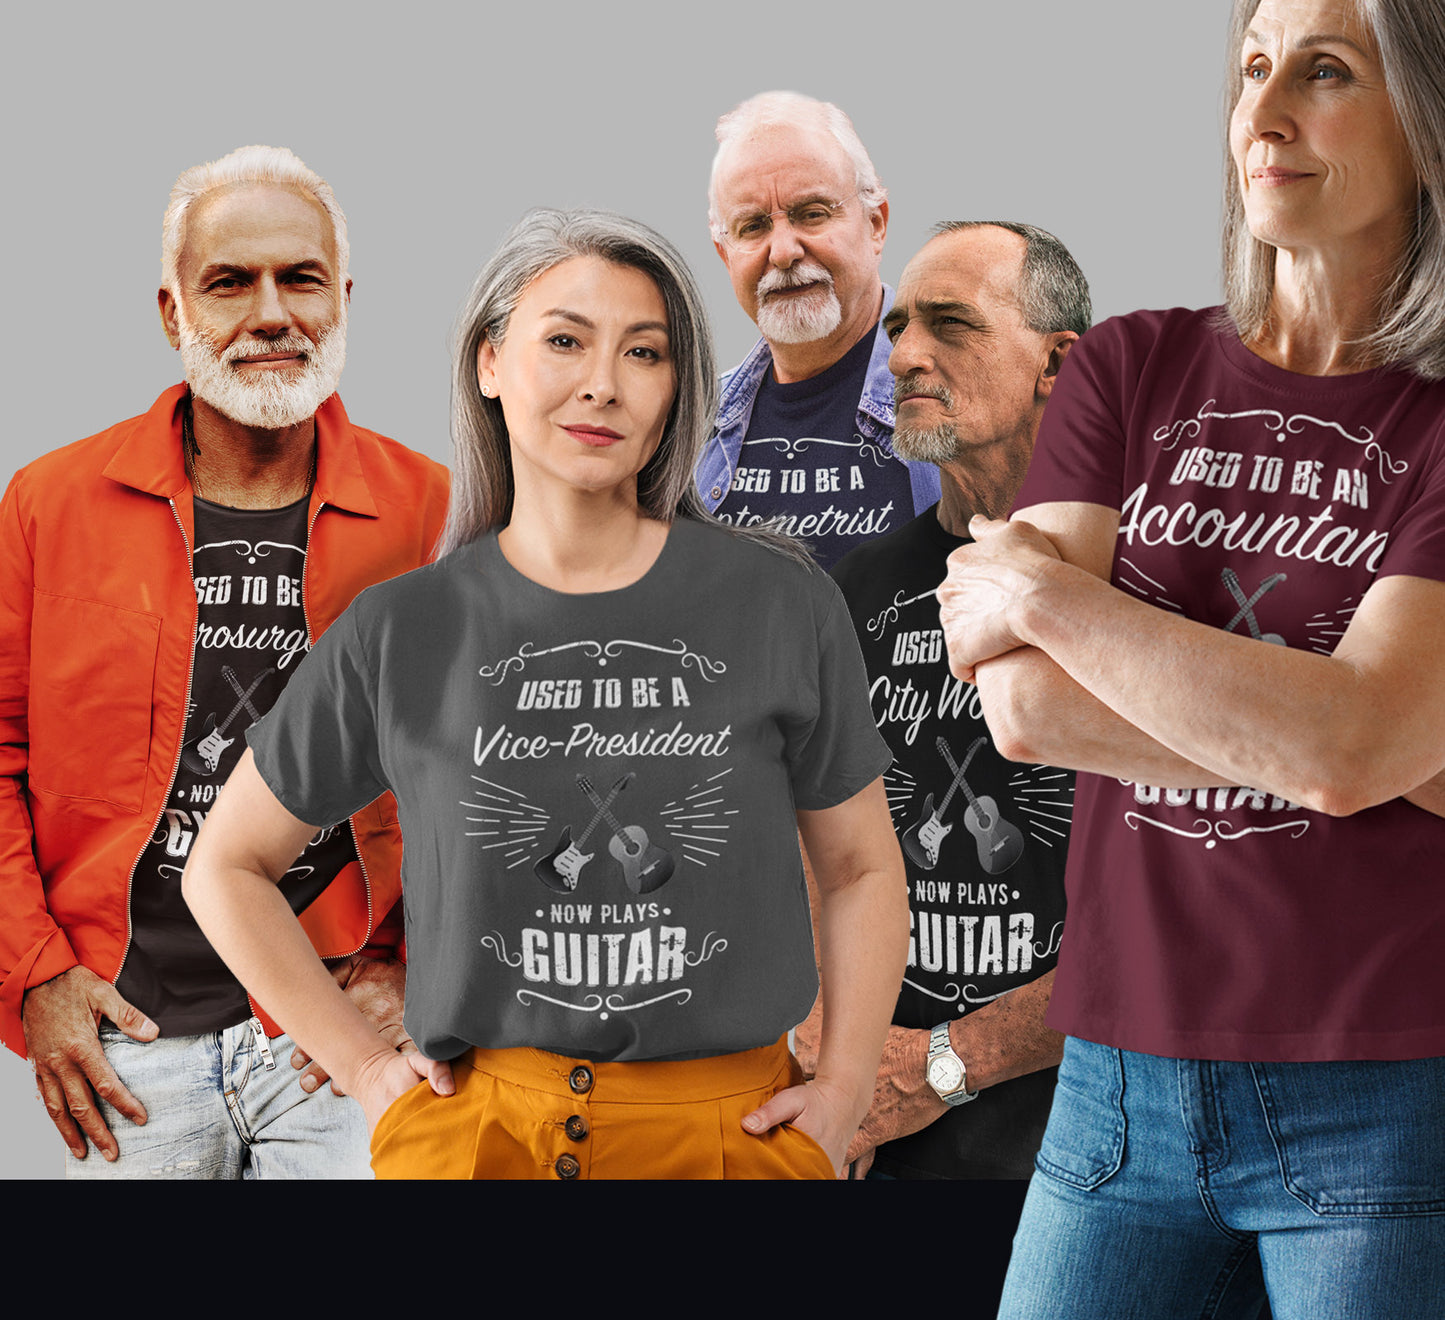 Used to be a CEO; Now Plays GUITAR - Funny Retirement Gift, Unisex T-shirt Bella+Canvas 3001, dark shirt colors for amateur musician/guitar player